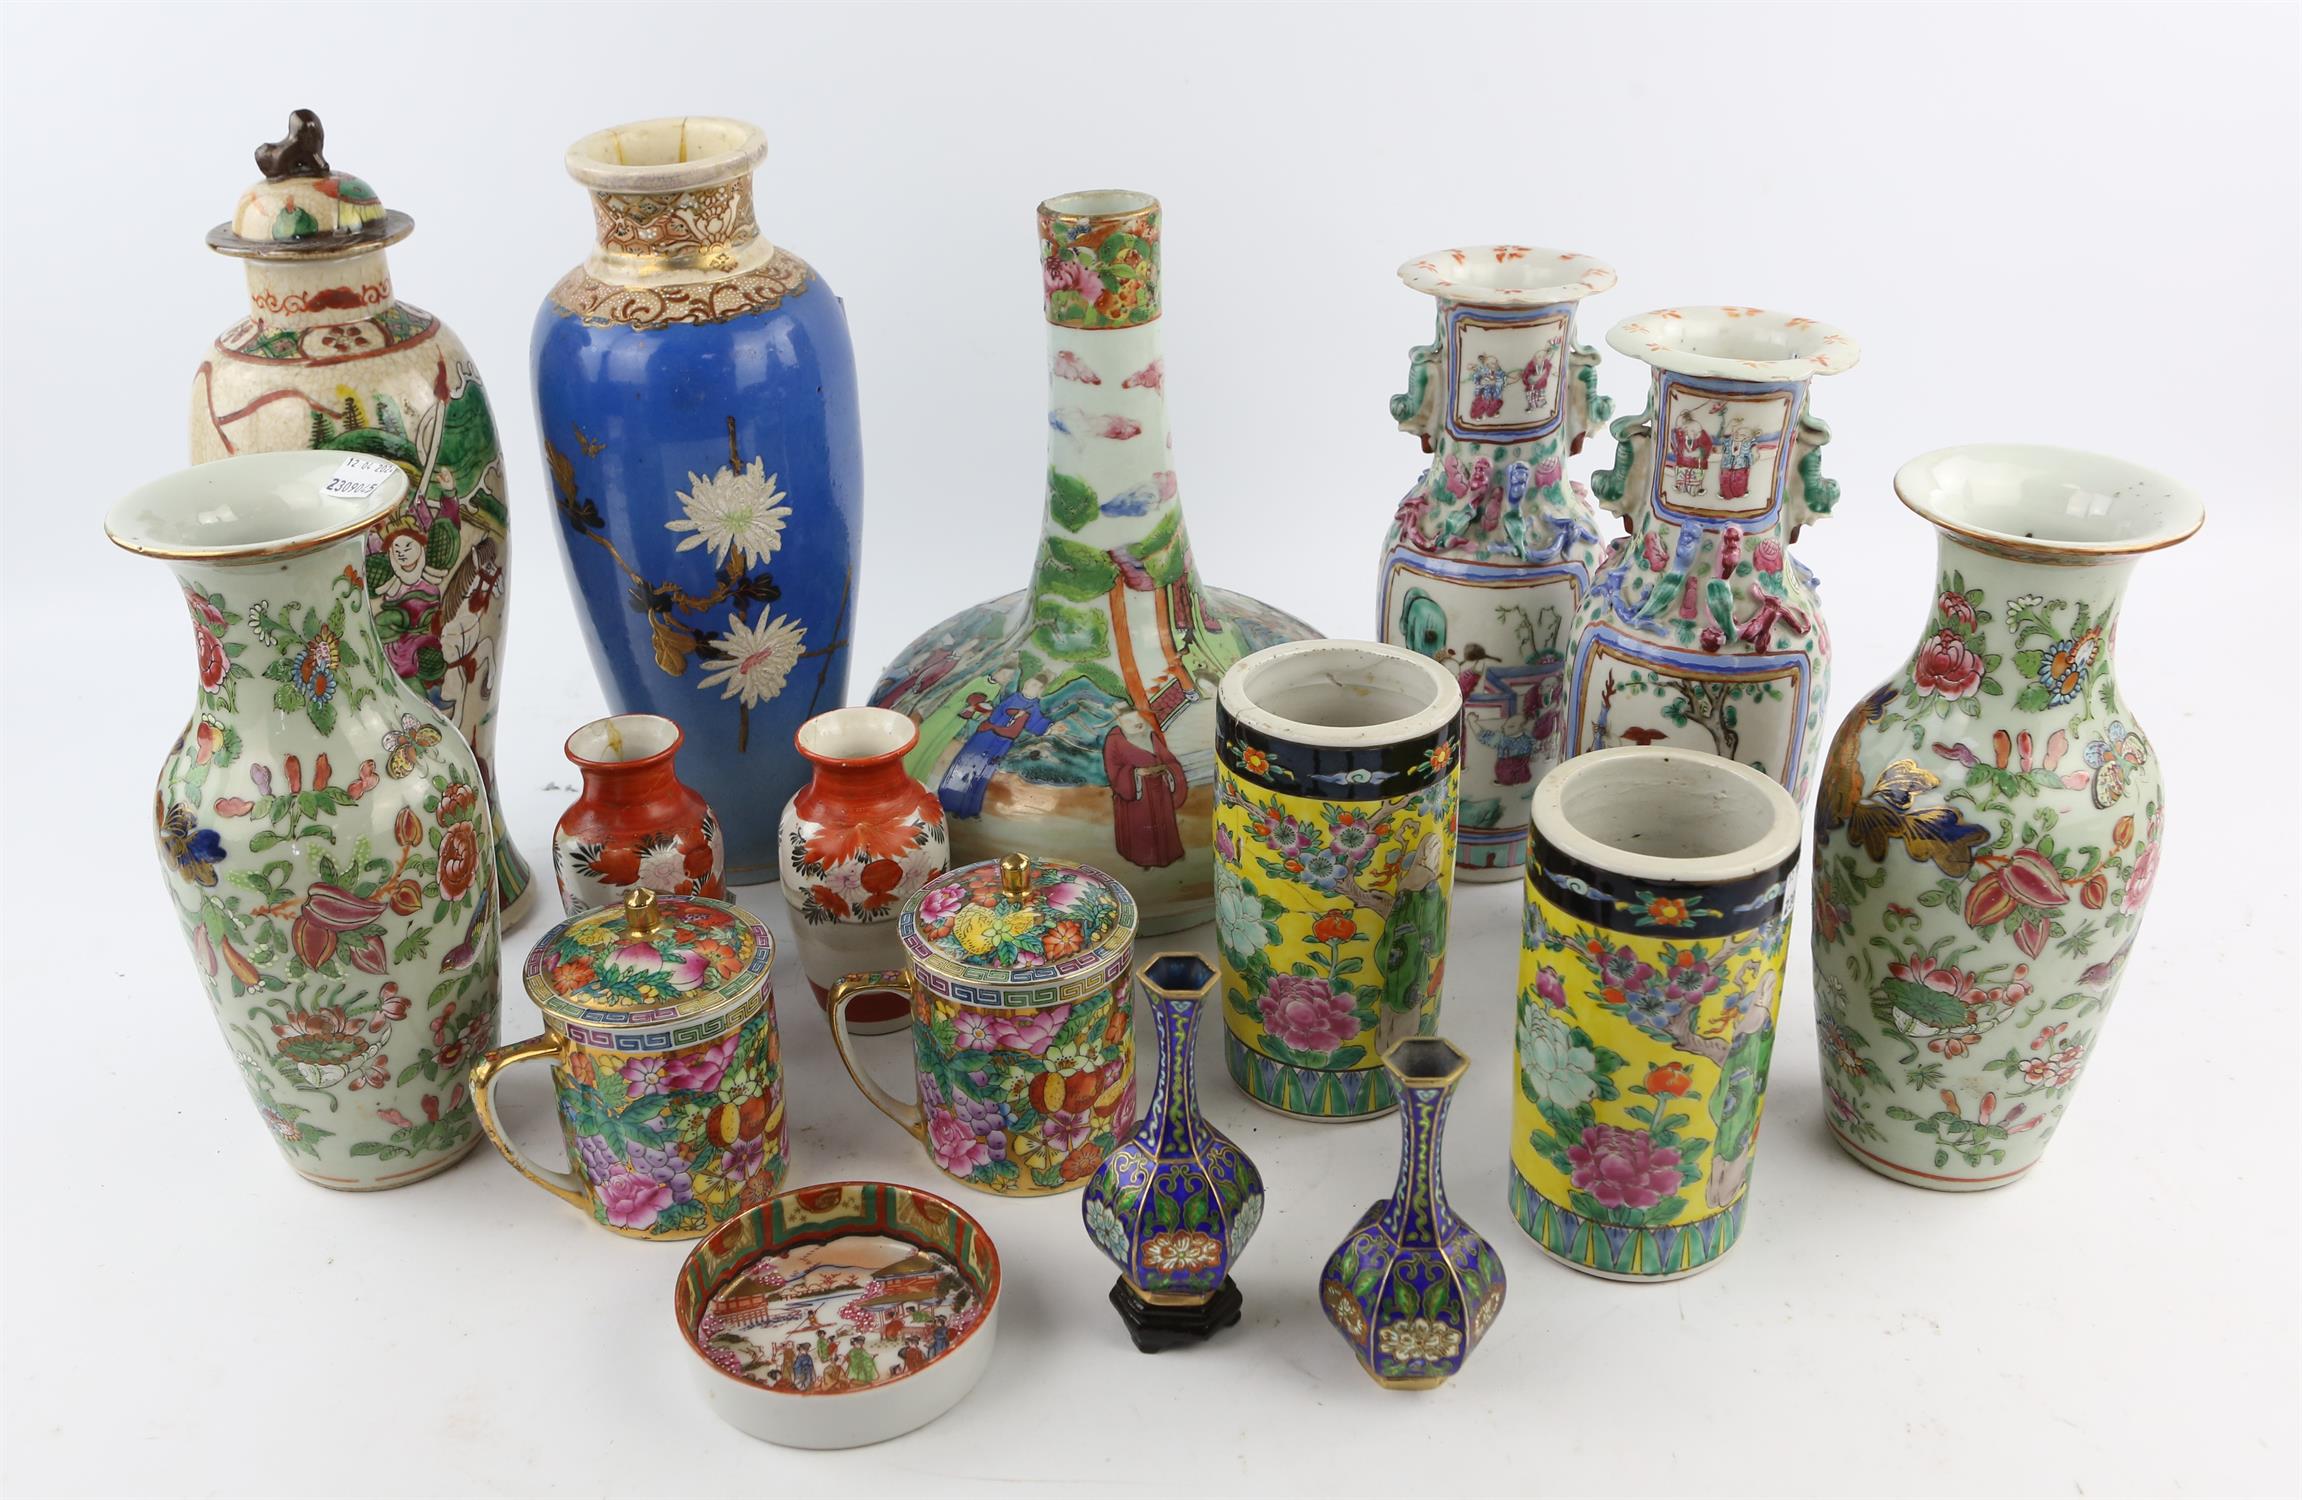 A large quantity of Asian ceramics including ; a late 19th century Cantonese bottle neck vase